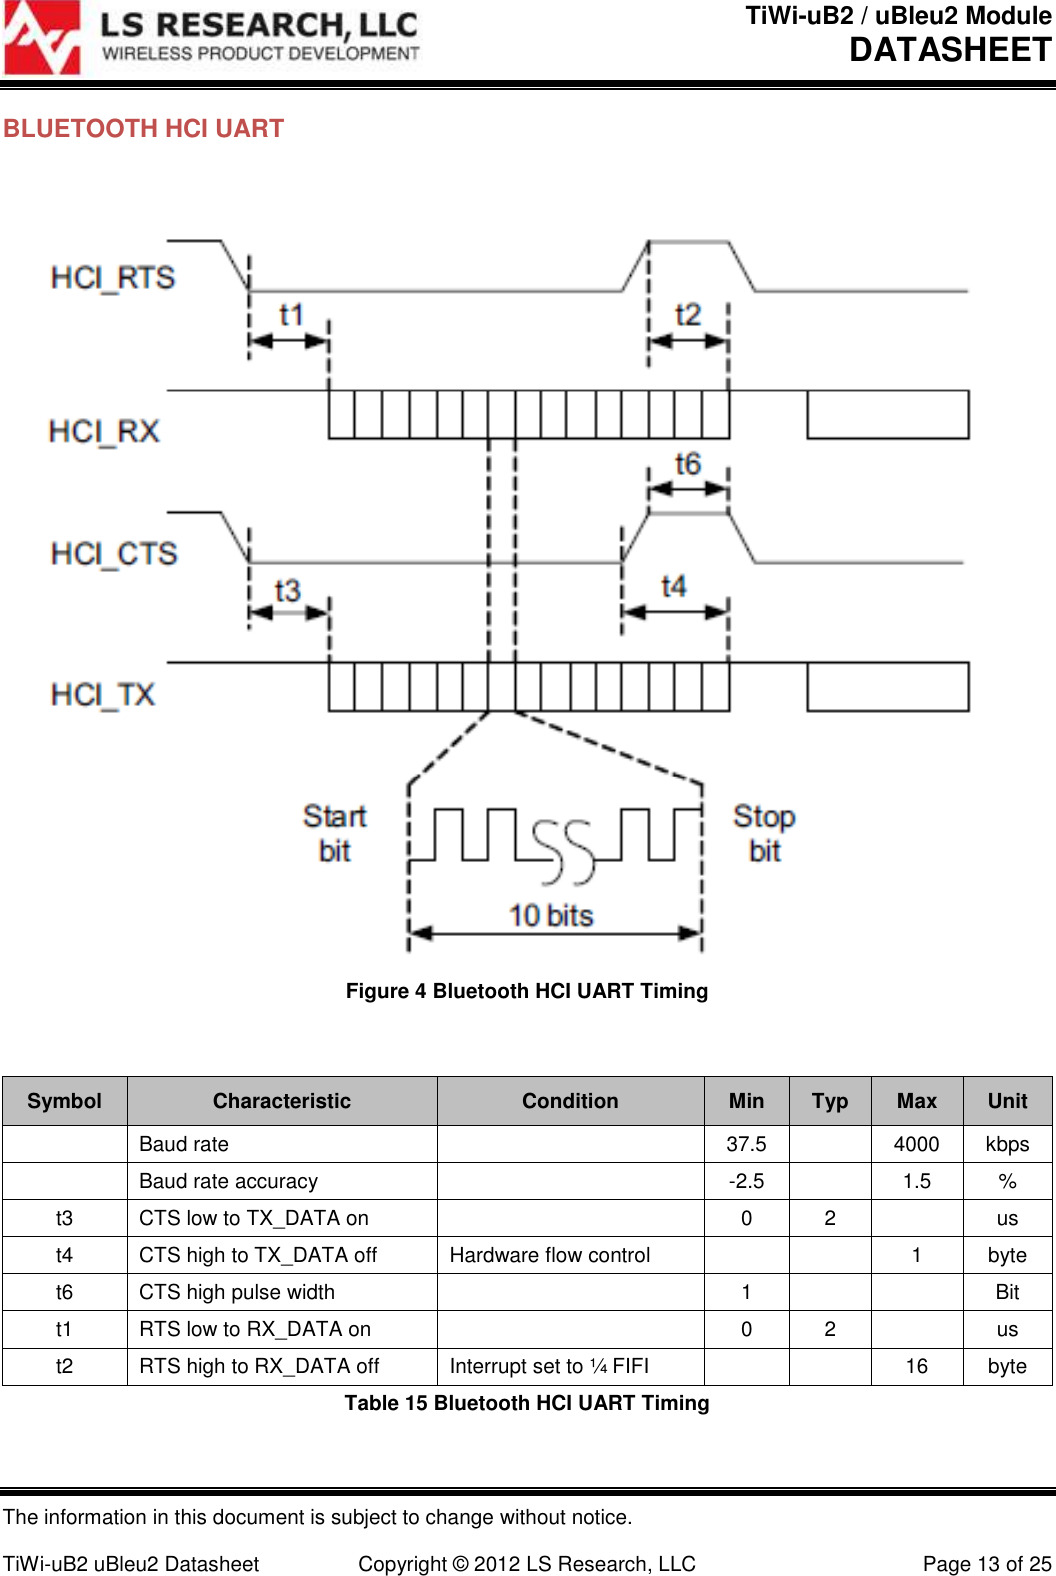 TiWi-uB2 / uBleu2 Module DATASHEET  The information in this document is subject to change without notice.  TiWi-uB2 uBleu2 Datasheet  Copyright © 2012 LS Research, LLC  Page 13 of 25 BLUETOOTH HCI UART    Figure 4 Bluetooth HCI UART Timing  Symbol Characteristic Condition Min Typ Max Unit  Baud rate  37.5  4000 kbps  Baud rate accuracy  -2.5  1.5 % t3 CTS low to TX_DATA on  0 2  us t4 CTS high to TX_DATA off Hardware flow control   1 byte t6 CTS high pulse width  1   Bit t1 RTS low to RX_DATA on  0 2  us t2 RTS high to RX_DATA off Interrupt set to ¼ FIFI   16 byte Table 15 Bluetooth HCI UART Timing 